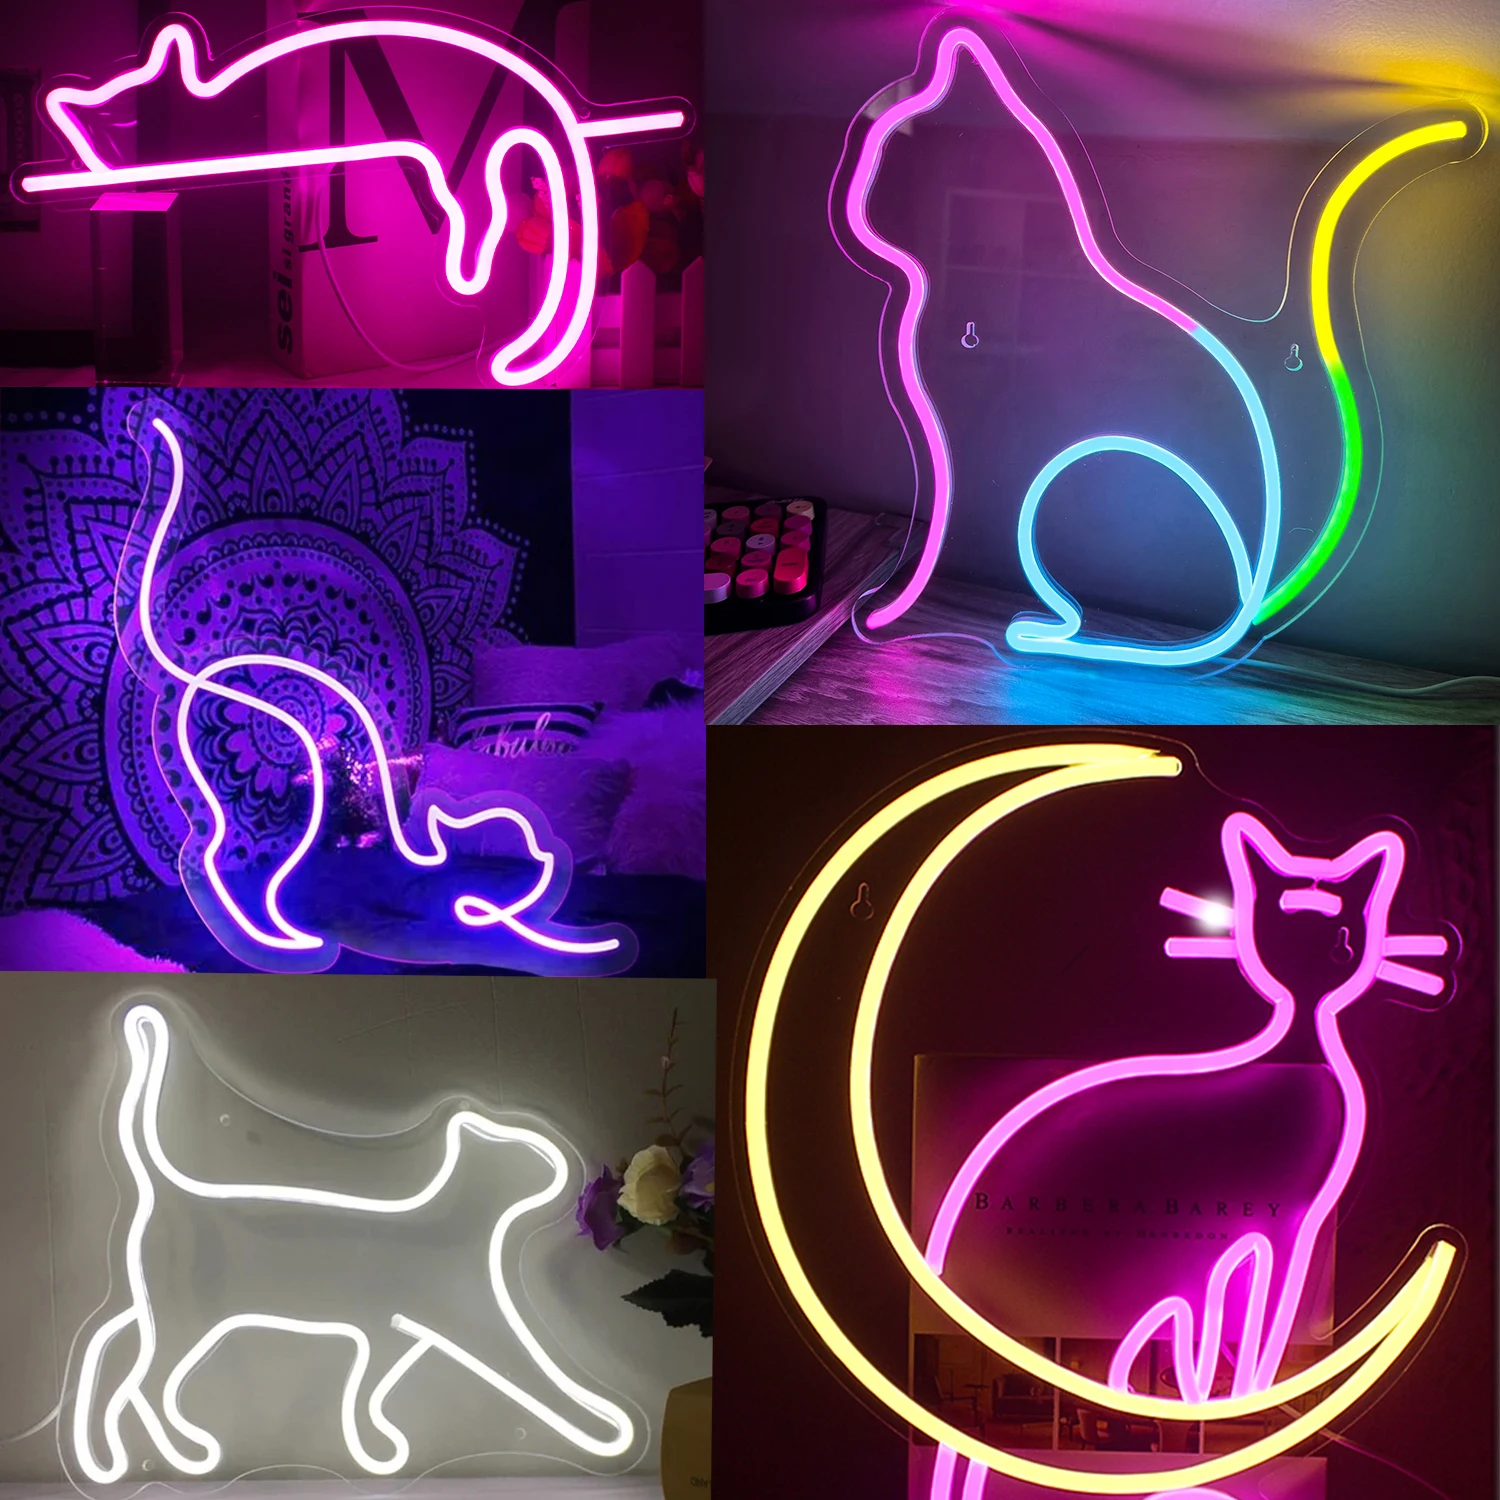 Wanxing Lazy Cat Anime Cartoon Neon Sign Led Light Custom Light Party Home Child Room Engagement Pet Animal Wall Decoration Gift toy traffic toys for kids sound light mini cones sign models plastic signs signal plaything child